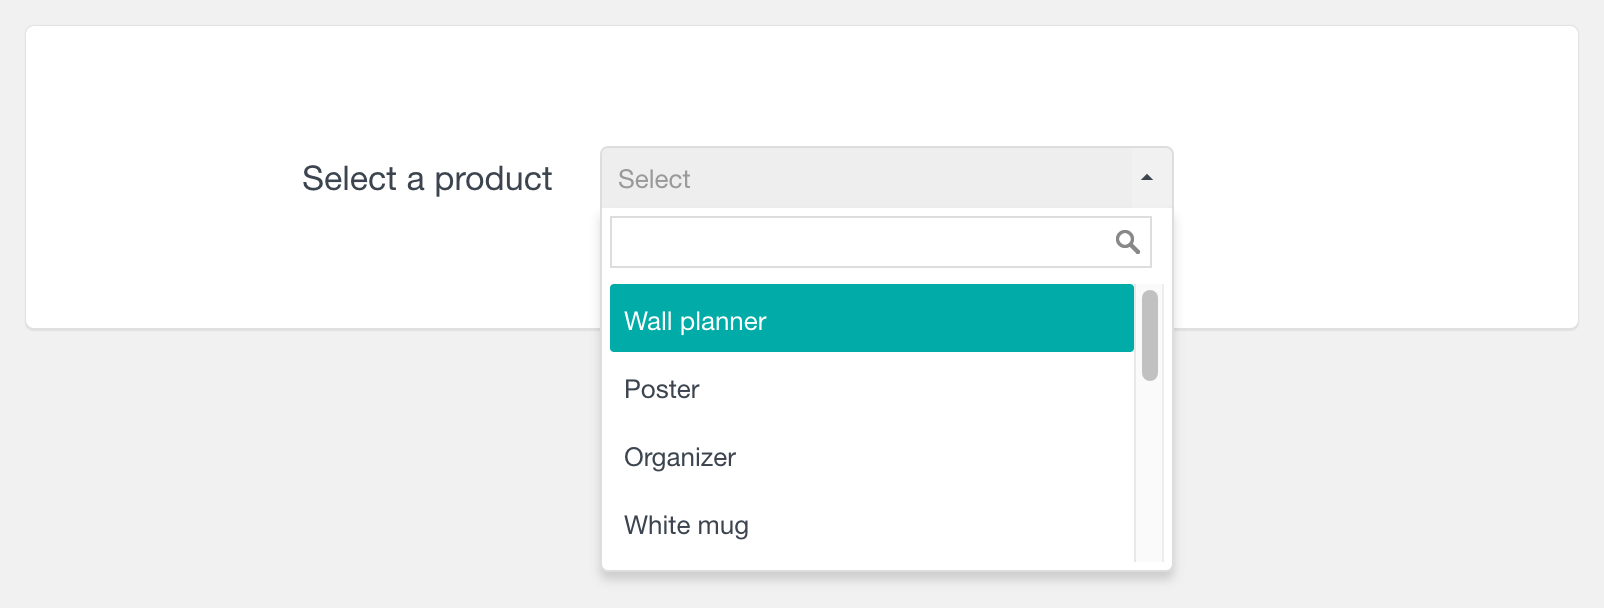 WooCommerce reports select product